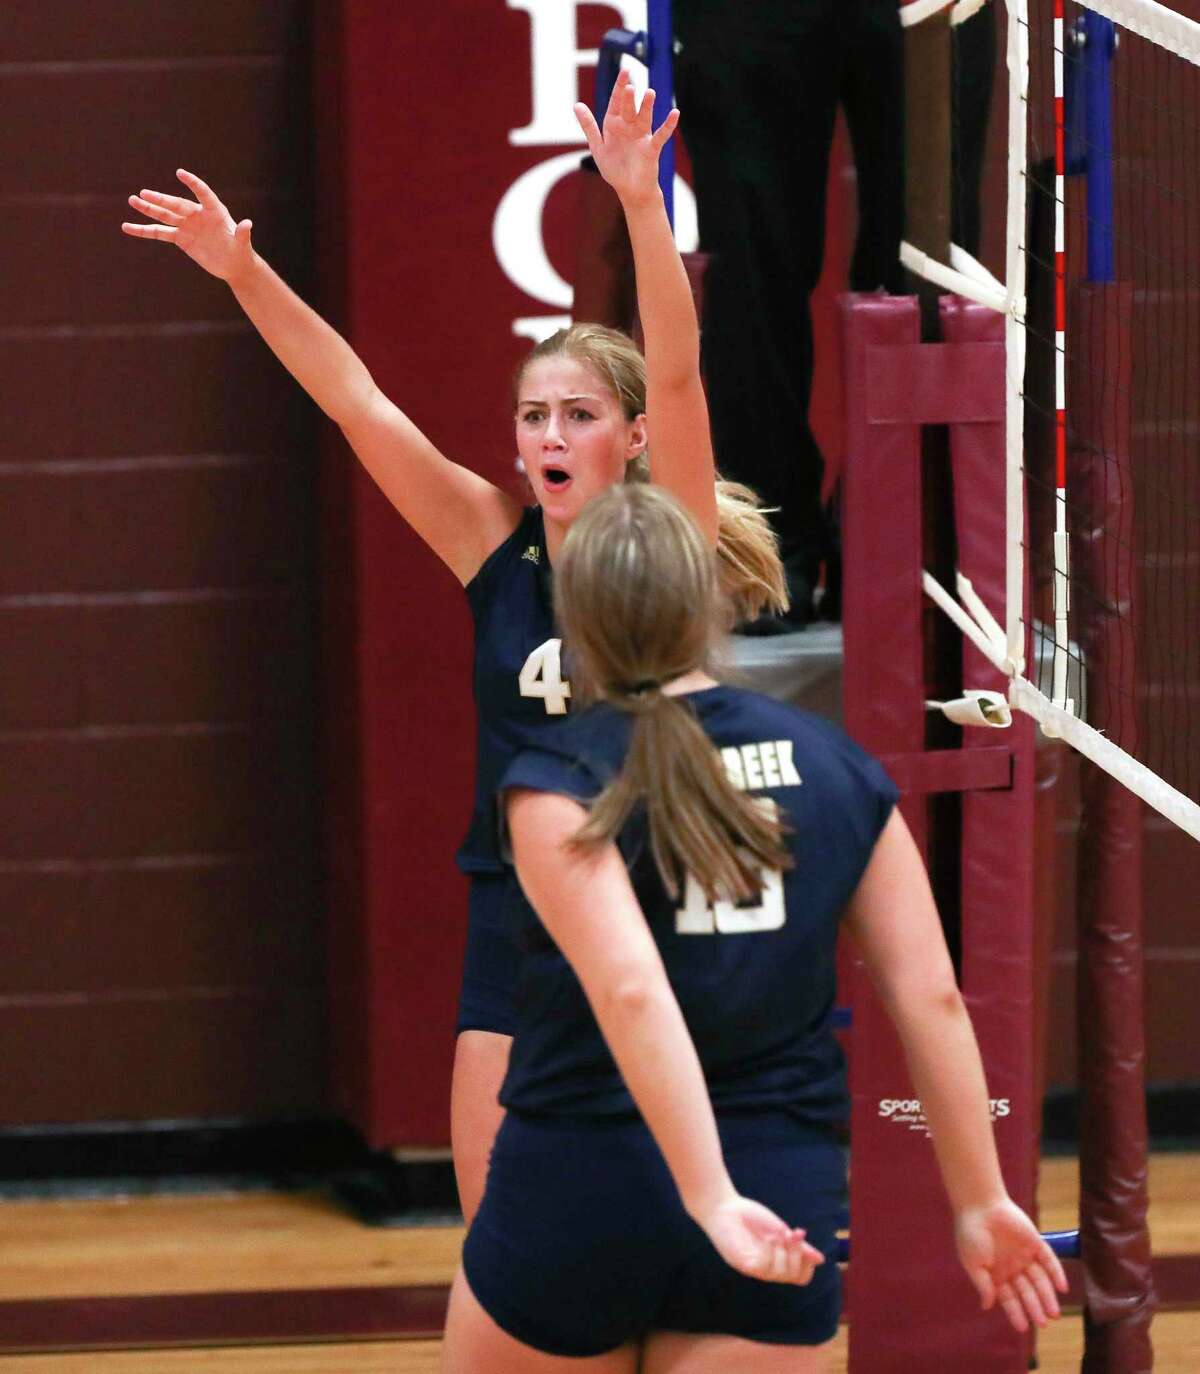 Lake Creek's Payton Woods (4) reacts after blocking a shot in the first set of a non-district high school volleyball match during the Katy ISD/Cy-Fair ISD Volleyball Tournament, Thursday, Aug. 11, 2022, in Cypress.